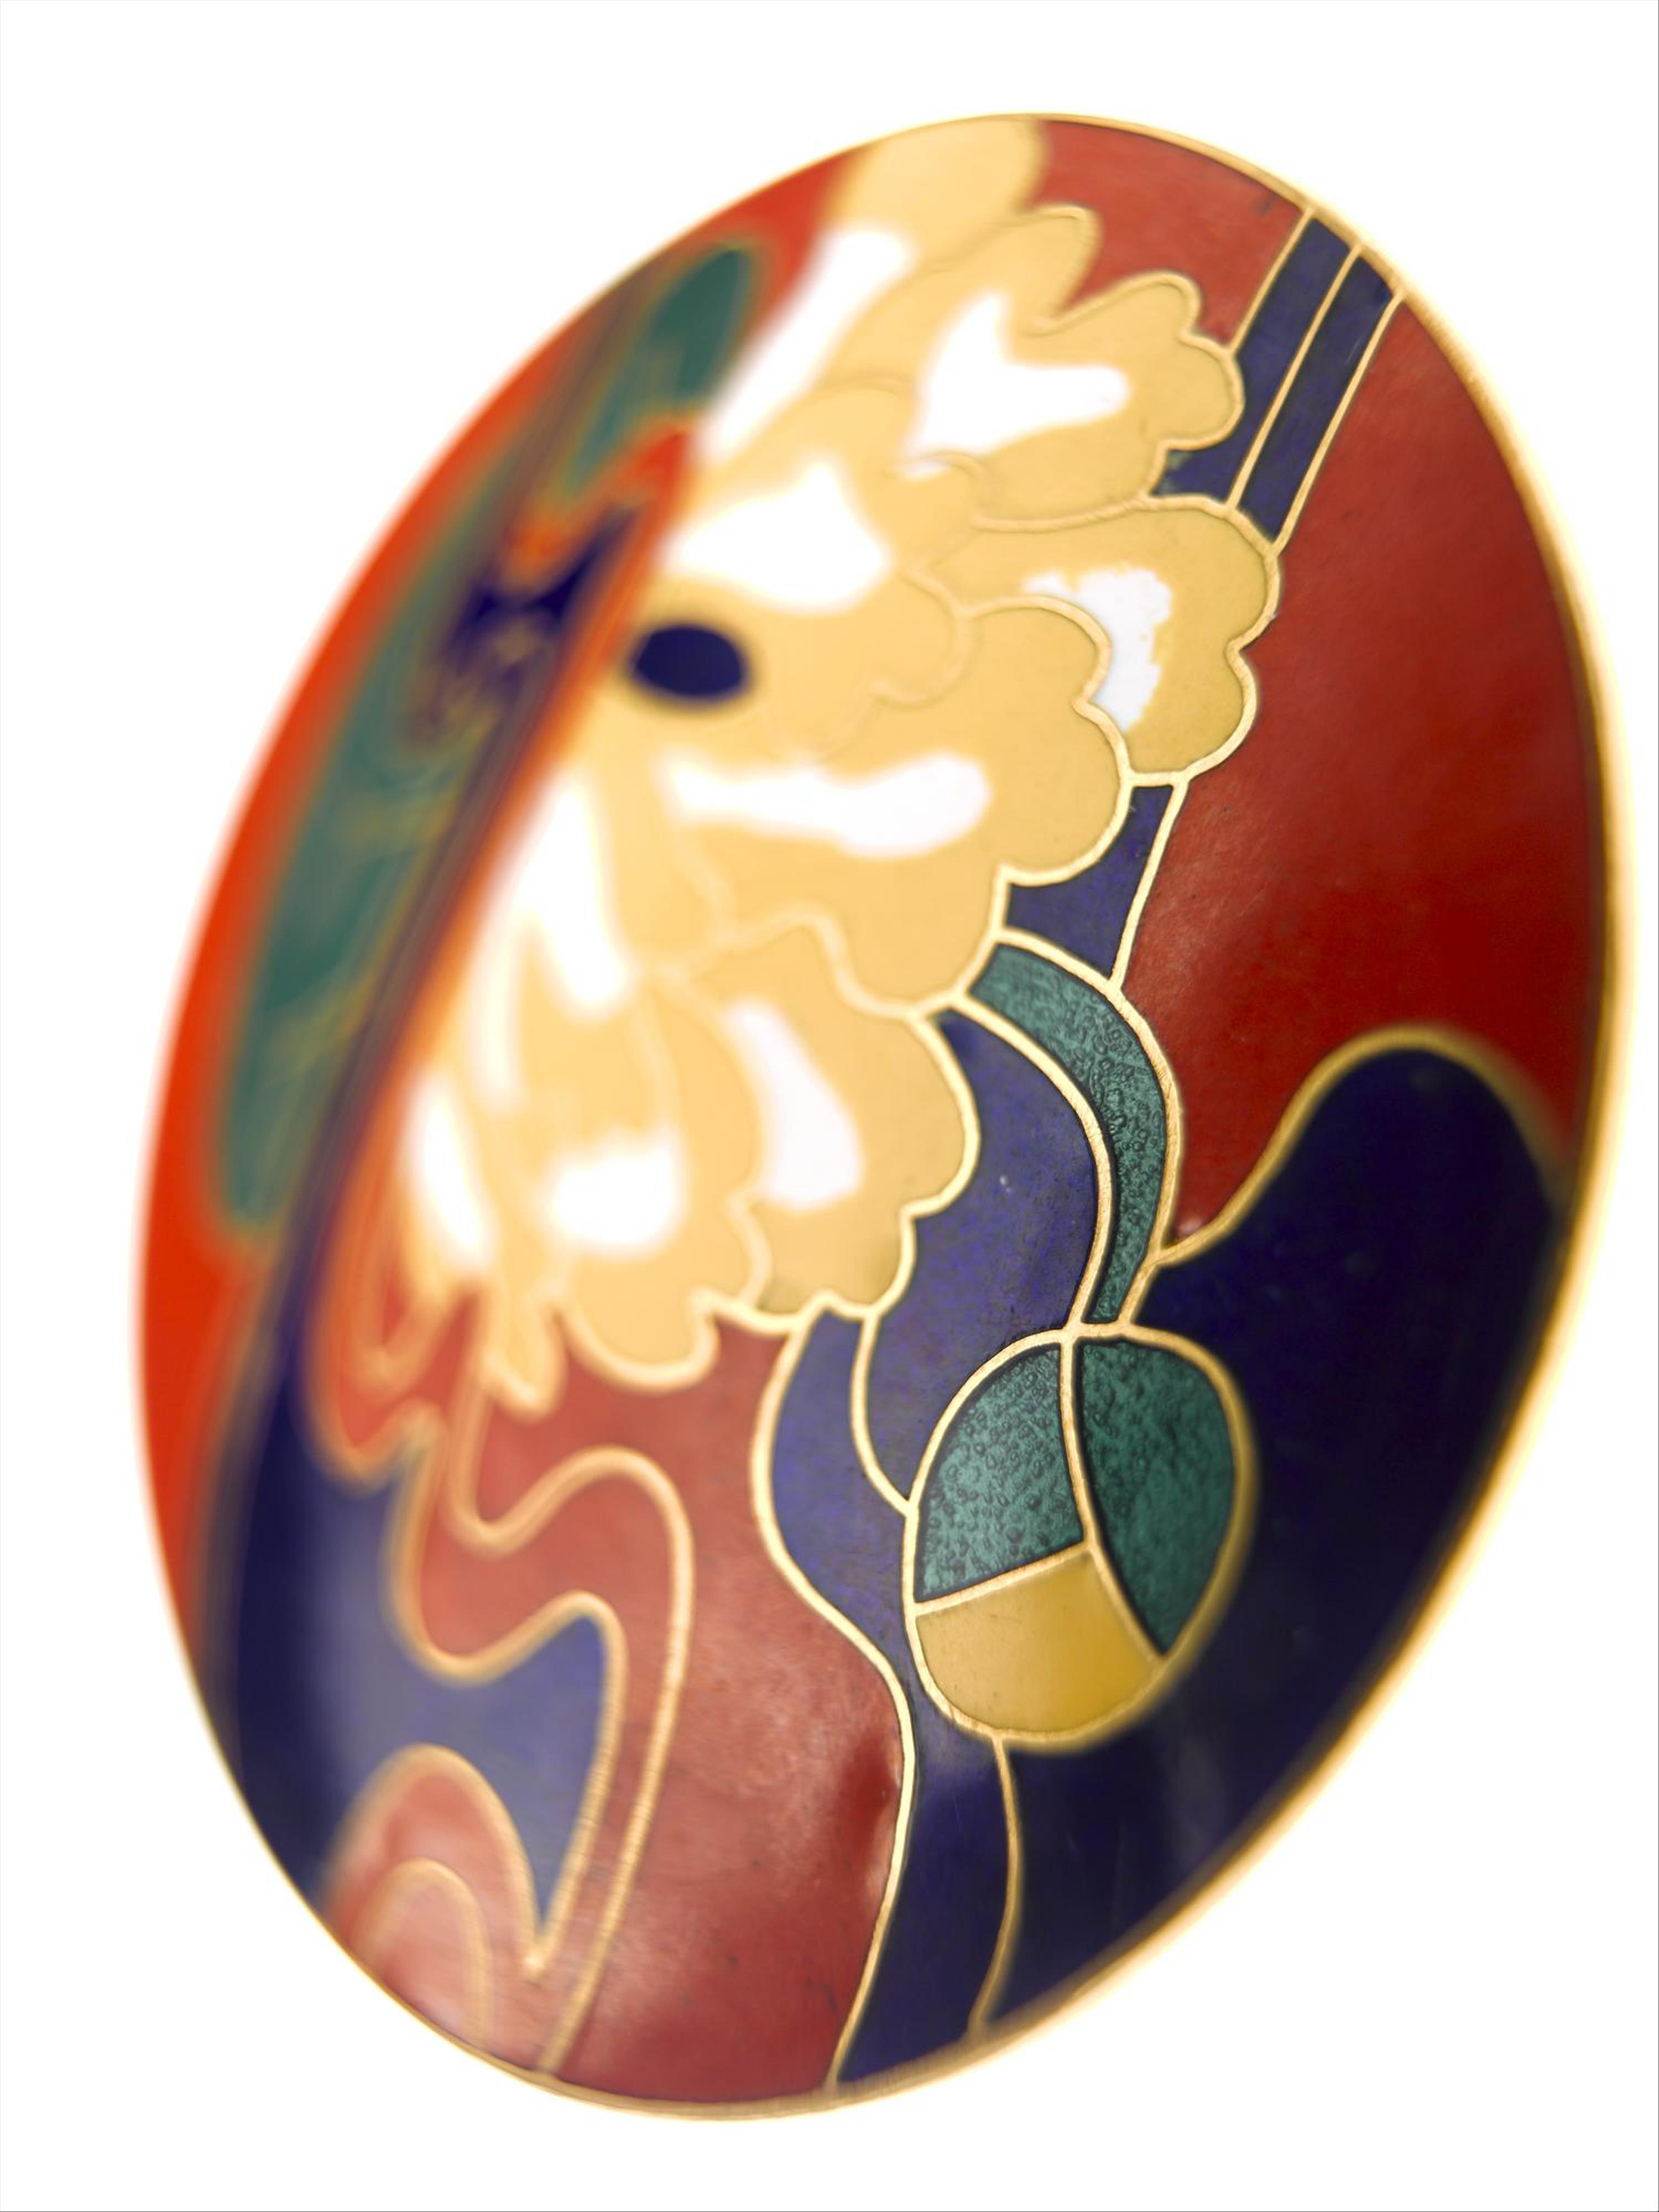 Large circular belt buckle of silver gilt featuring a Japanese style lotus flower design in coloured enamel inlay: British, designed for Jean Muir Ltd by Marks of Distinction, c. 1972.